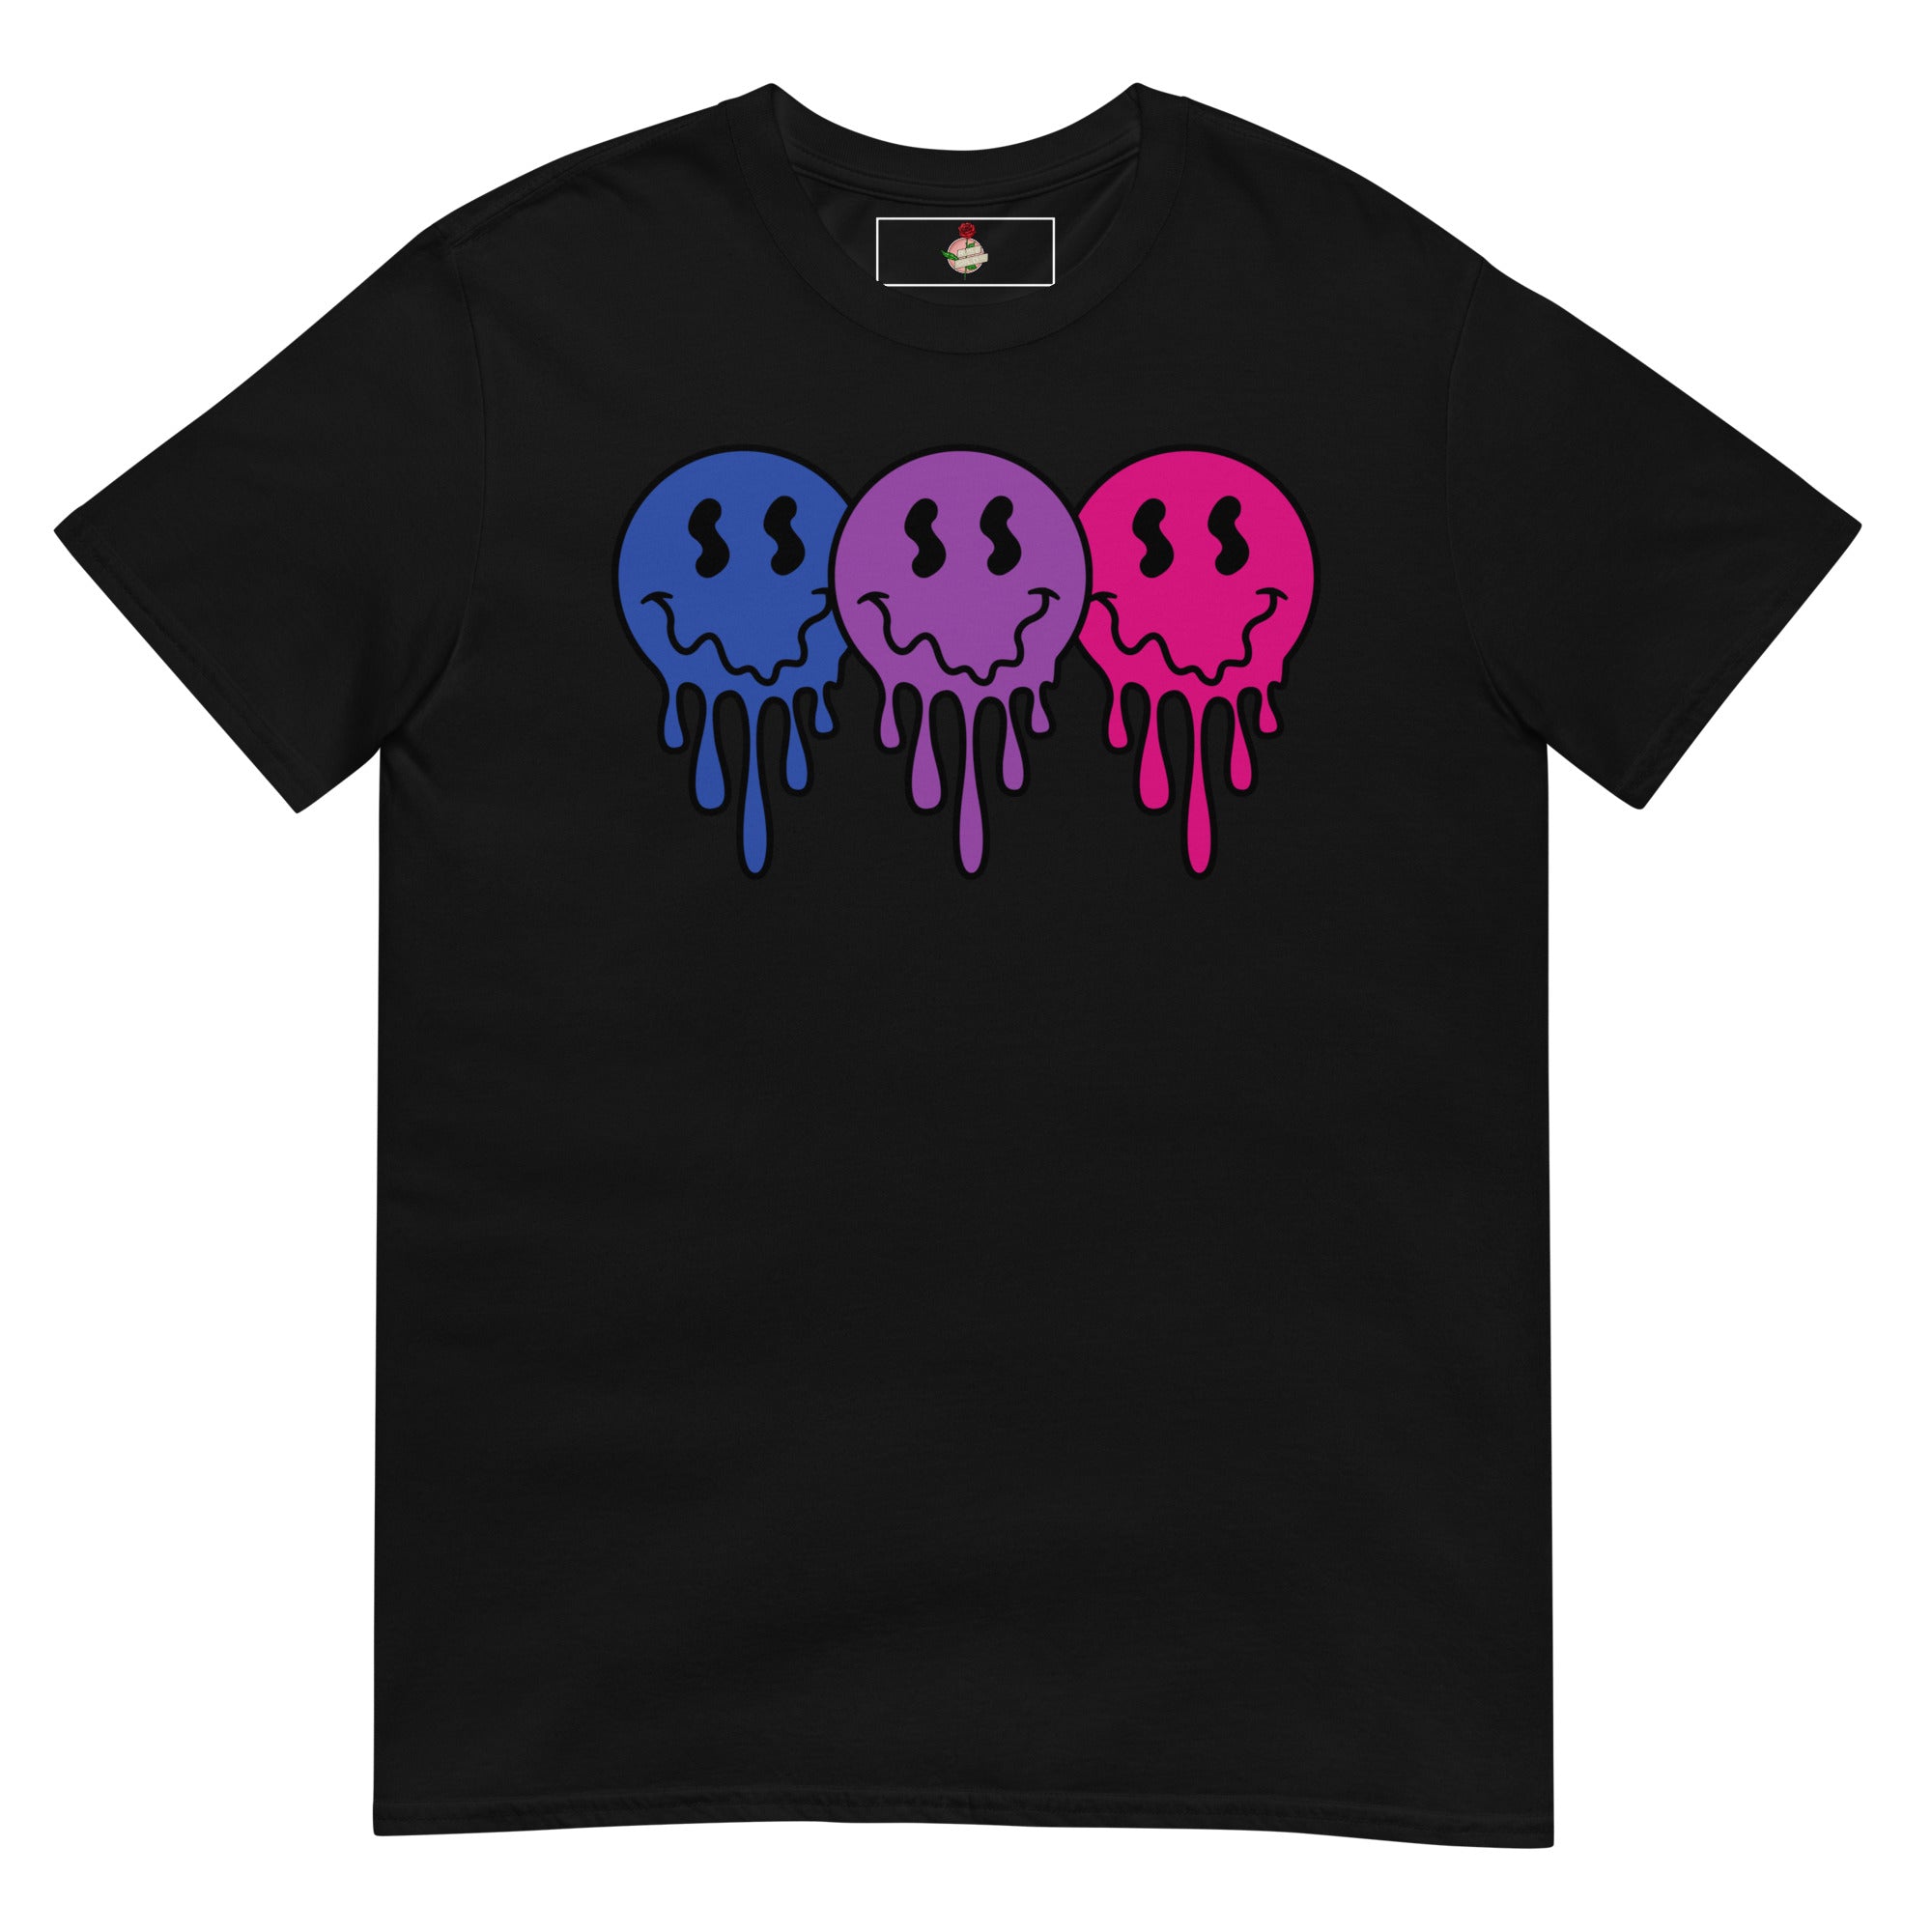 The Bisexual Pride Smiley Face Unisex T-Shirt